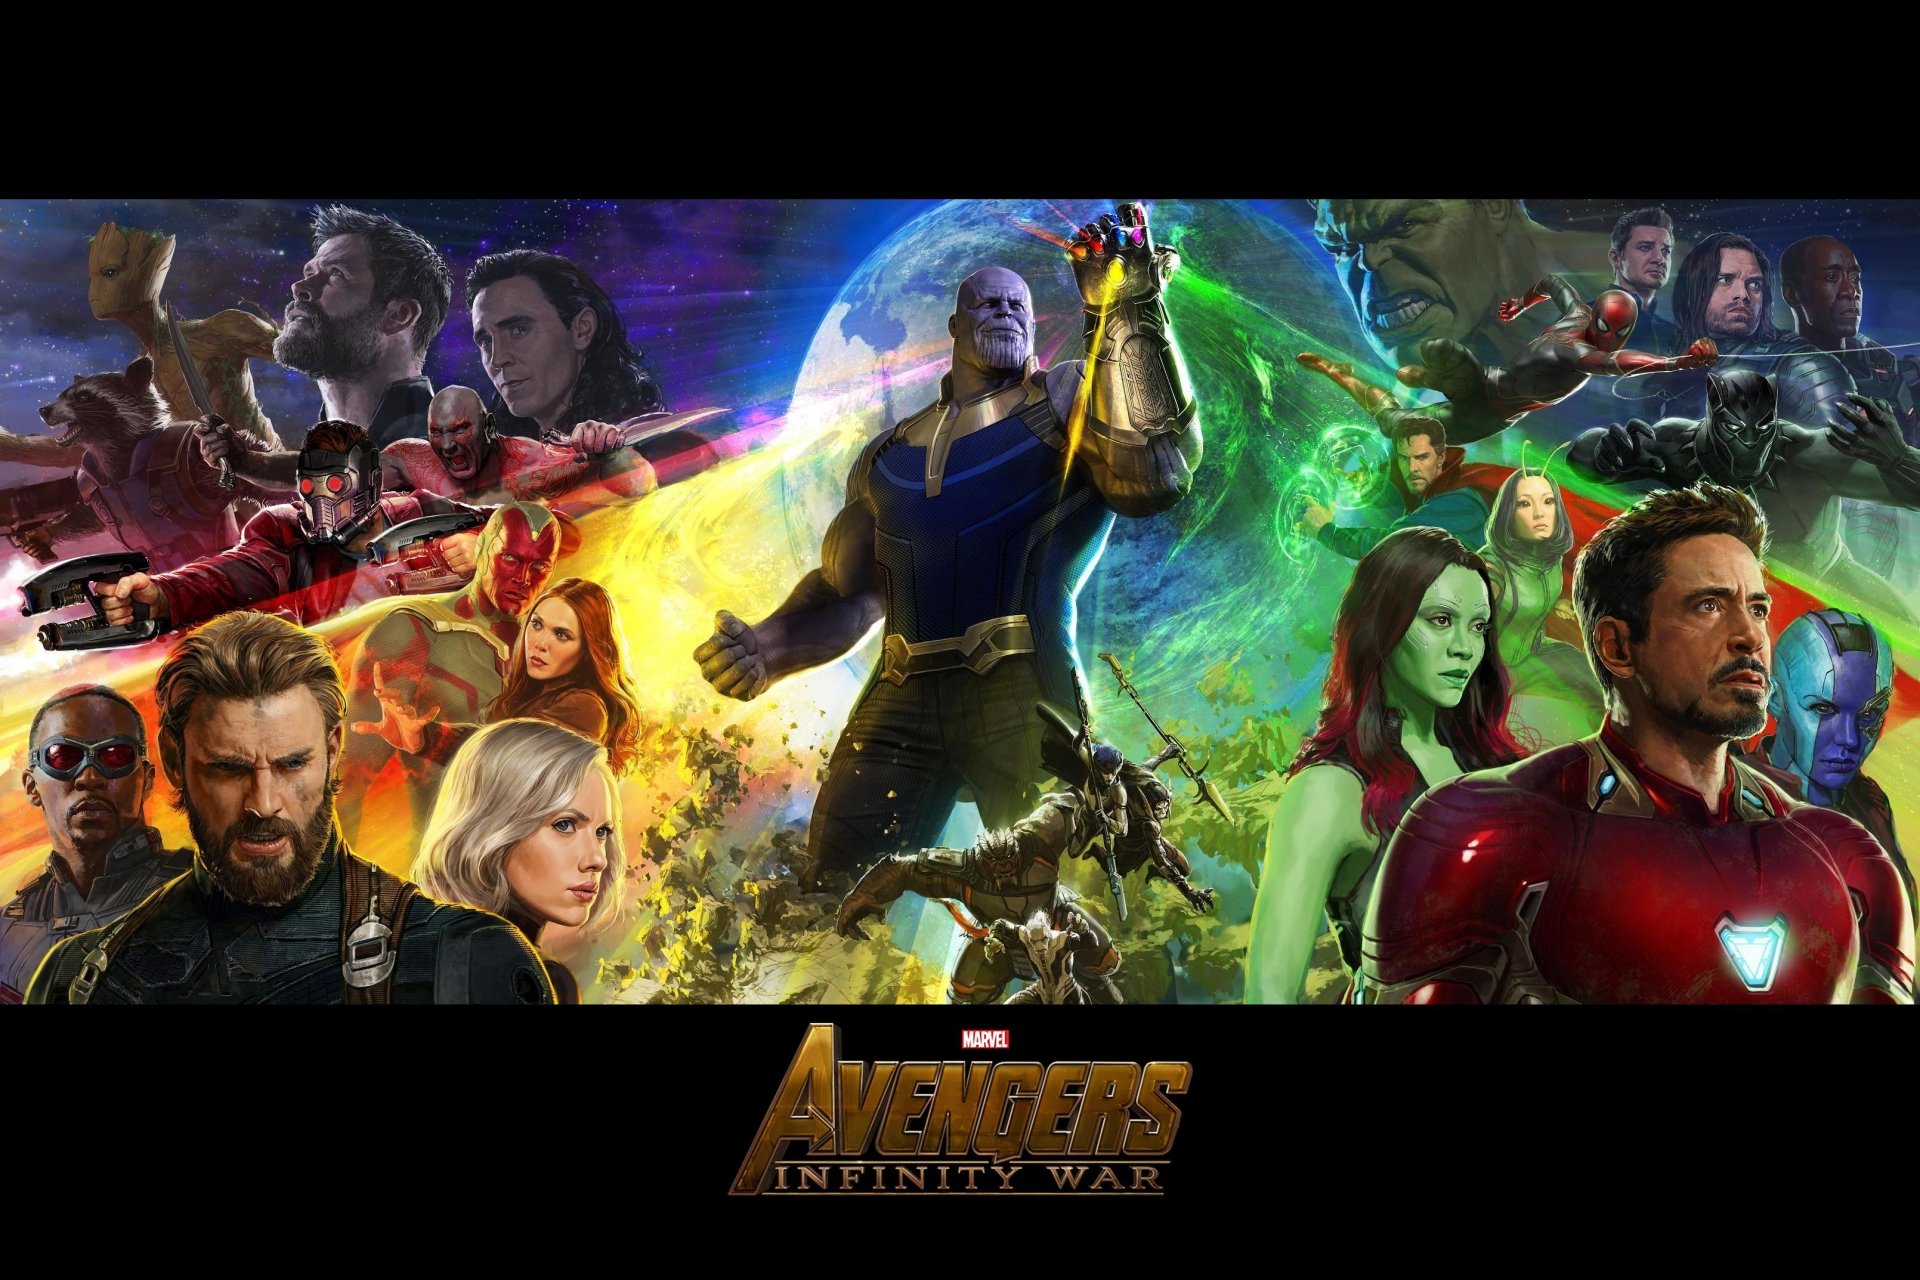 Avengers: Infinity War Picture by a href="https://alphacoders.com/auth...